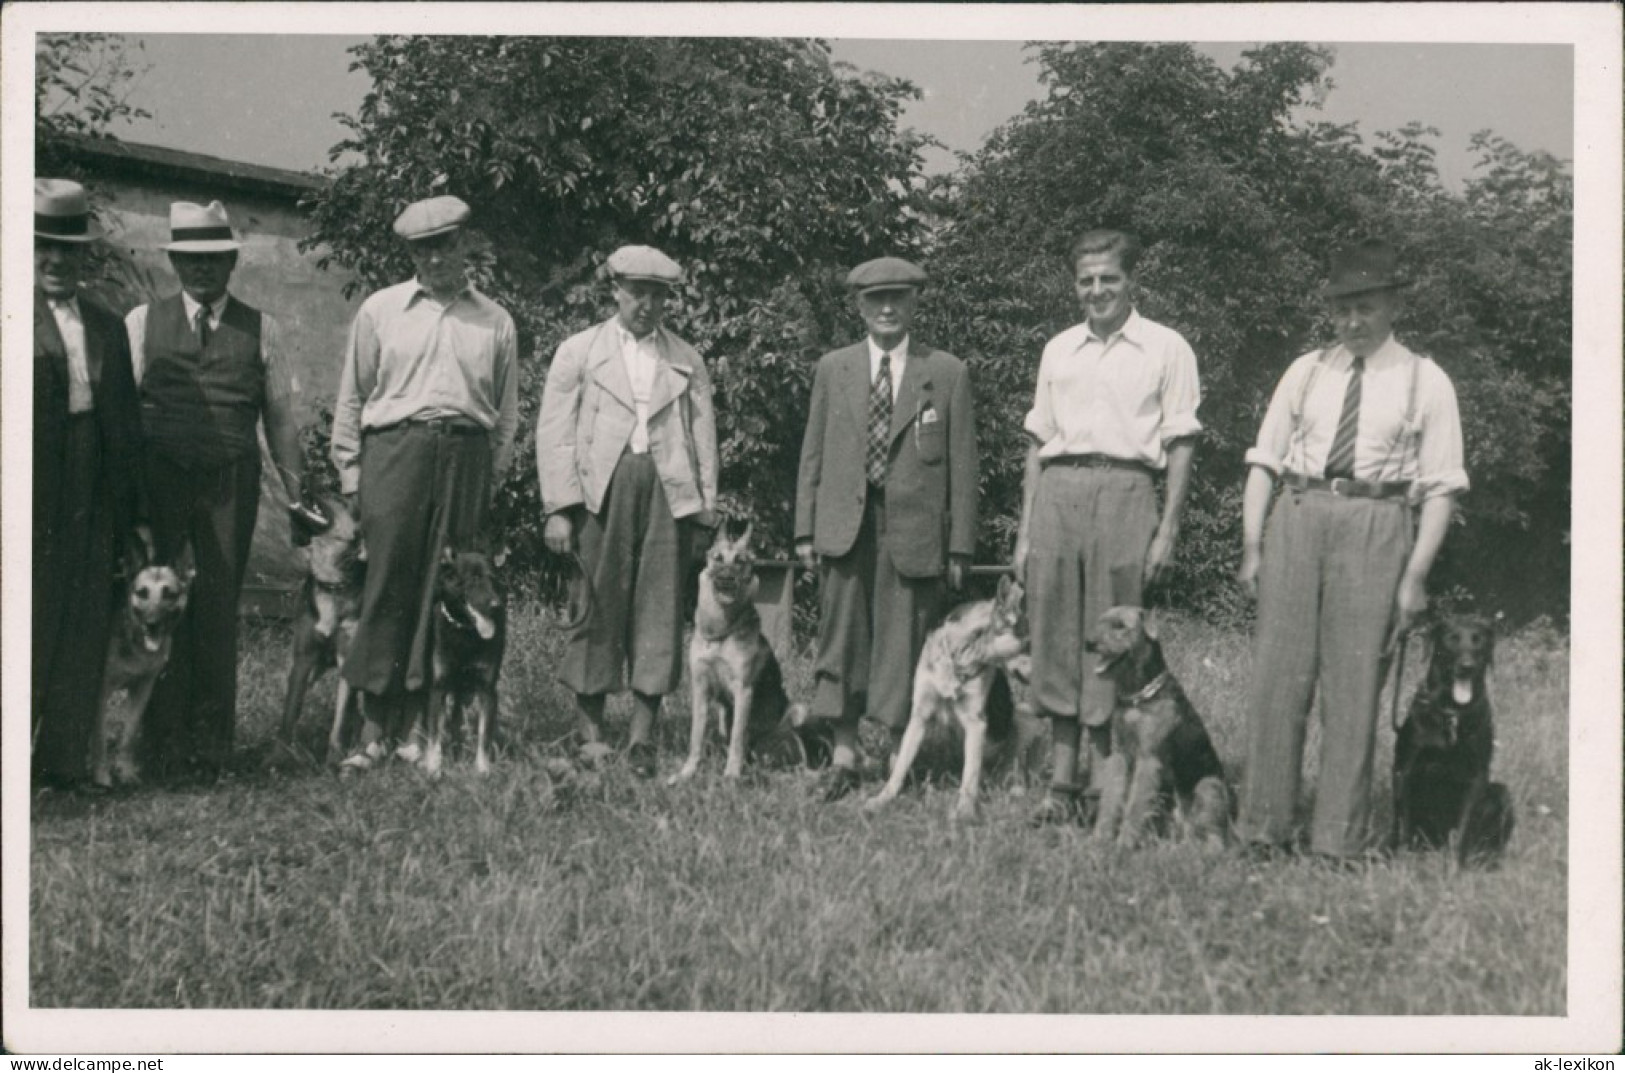 Männer Gruppe Mit Hunden, Real-Photo Men With Dogs 1934 Privatfoto - Personaggi